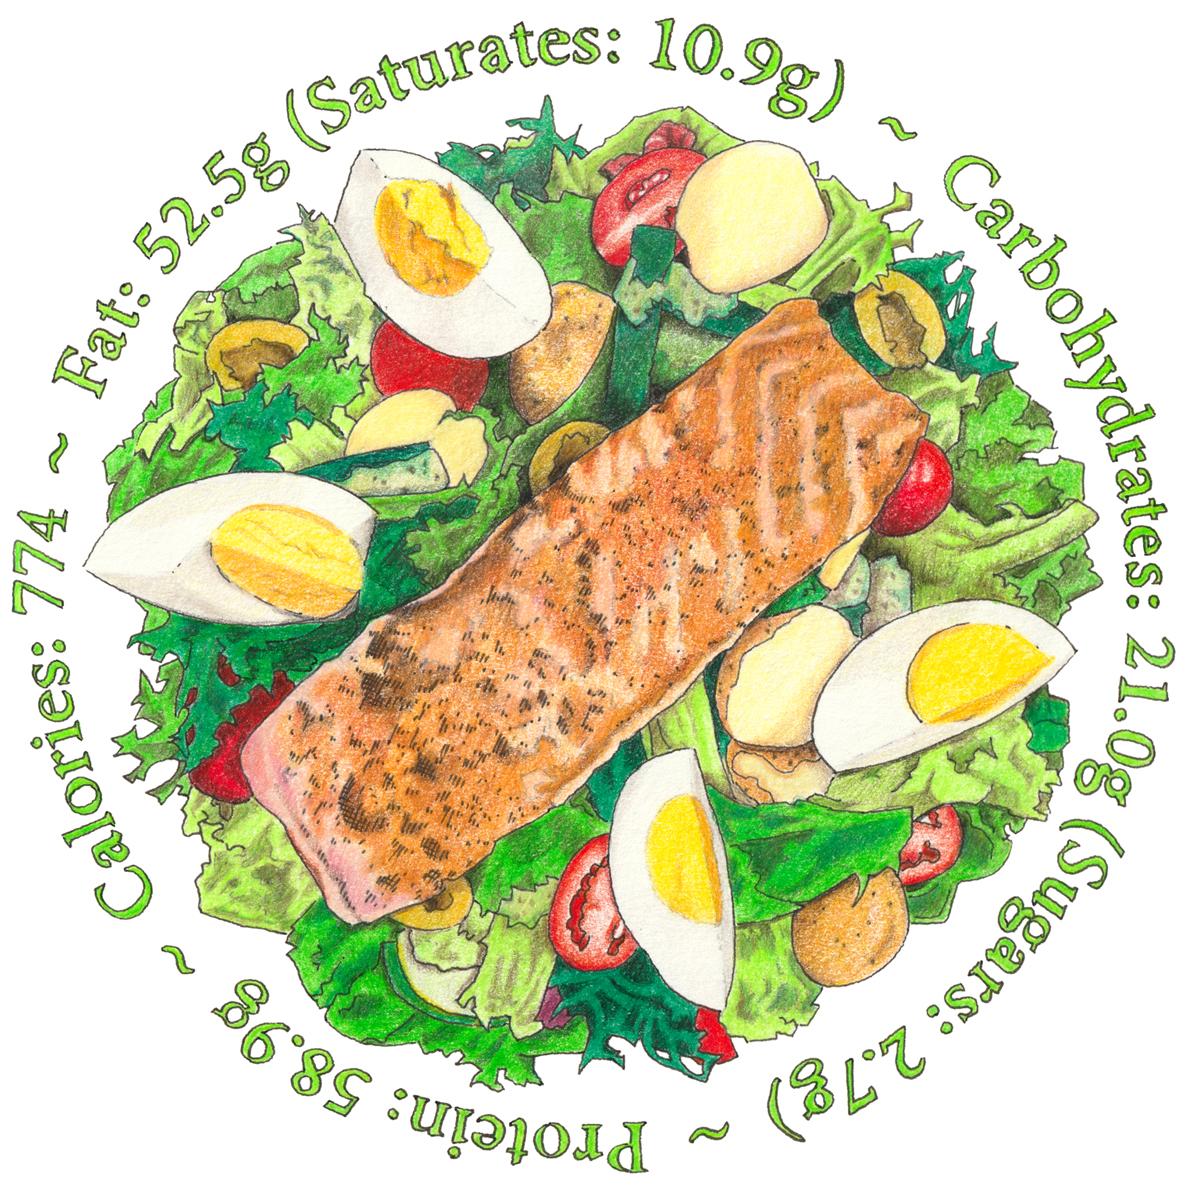 Salmon Salad - Limited Edition Print from original pen, ink and coloured pencil drawing